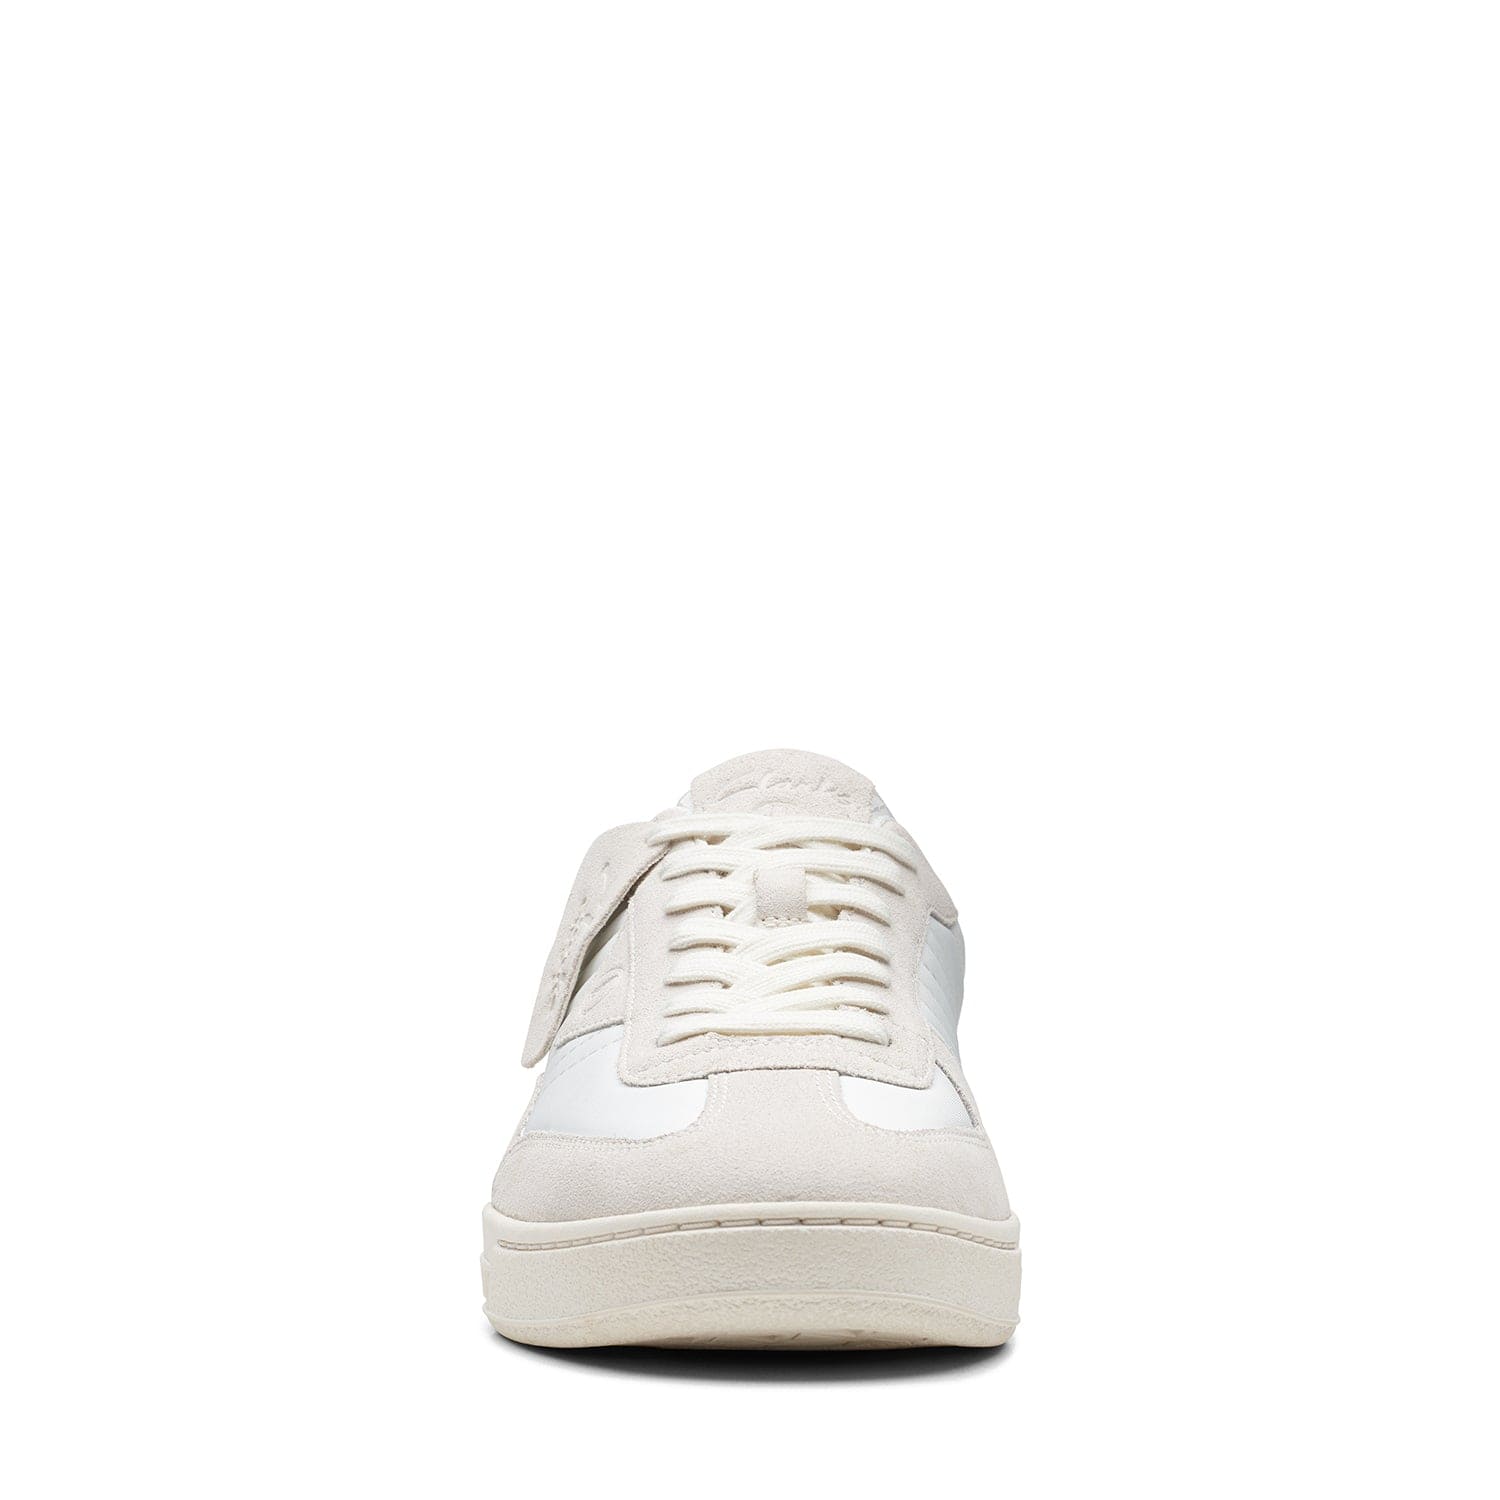 Clarks Craftrally Ace - Shoes - White/White - 261704017 - G Width (Standard Fit)